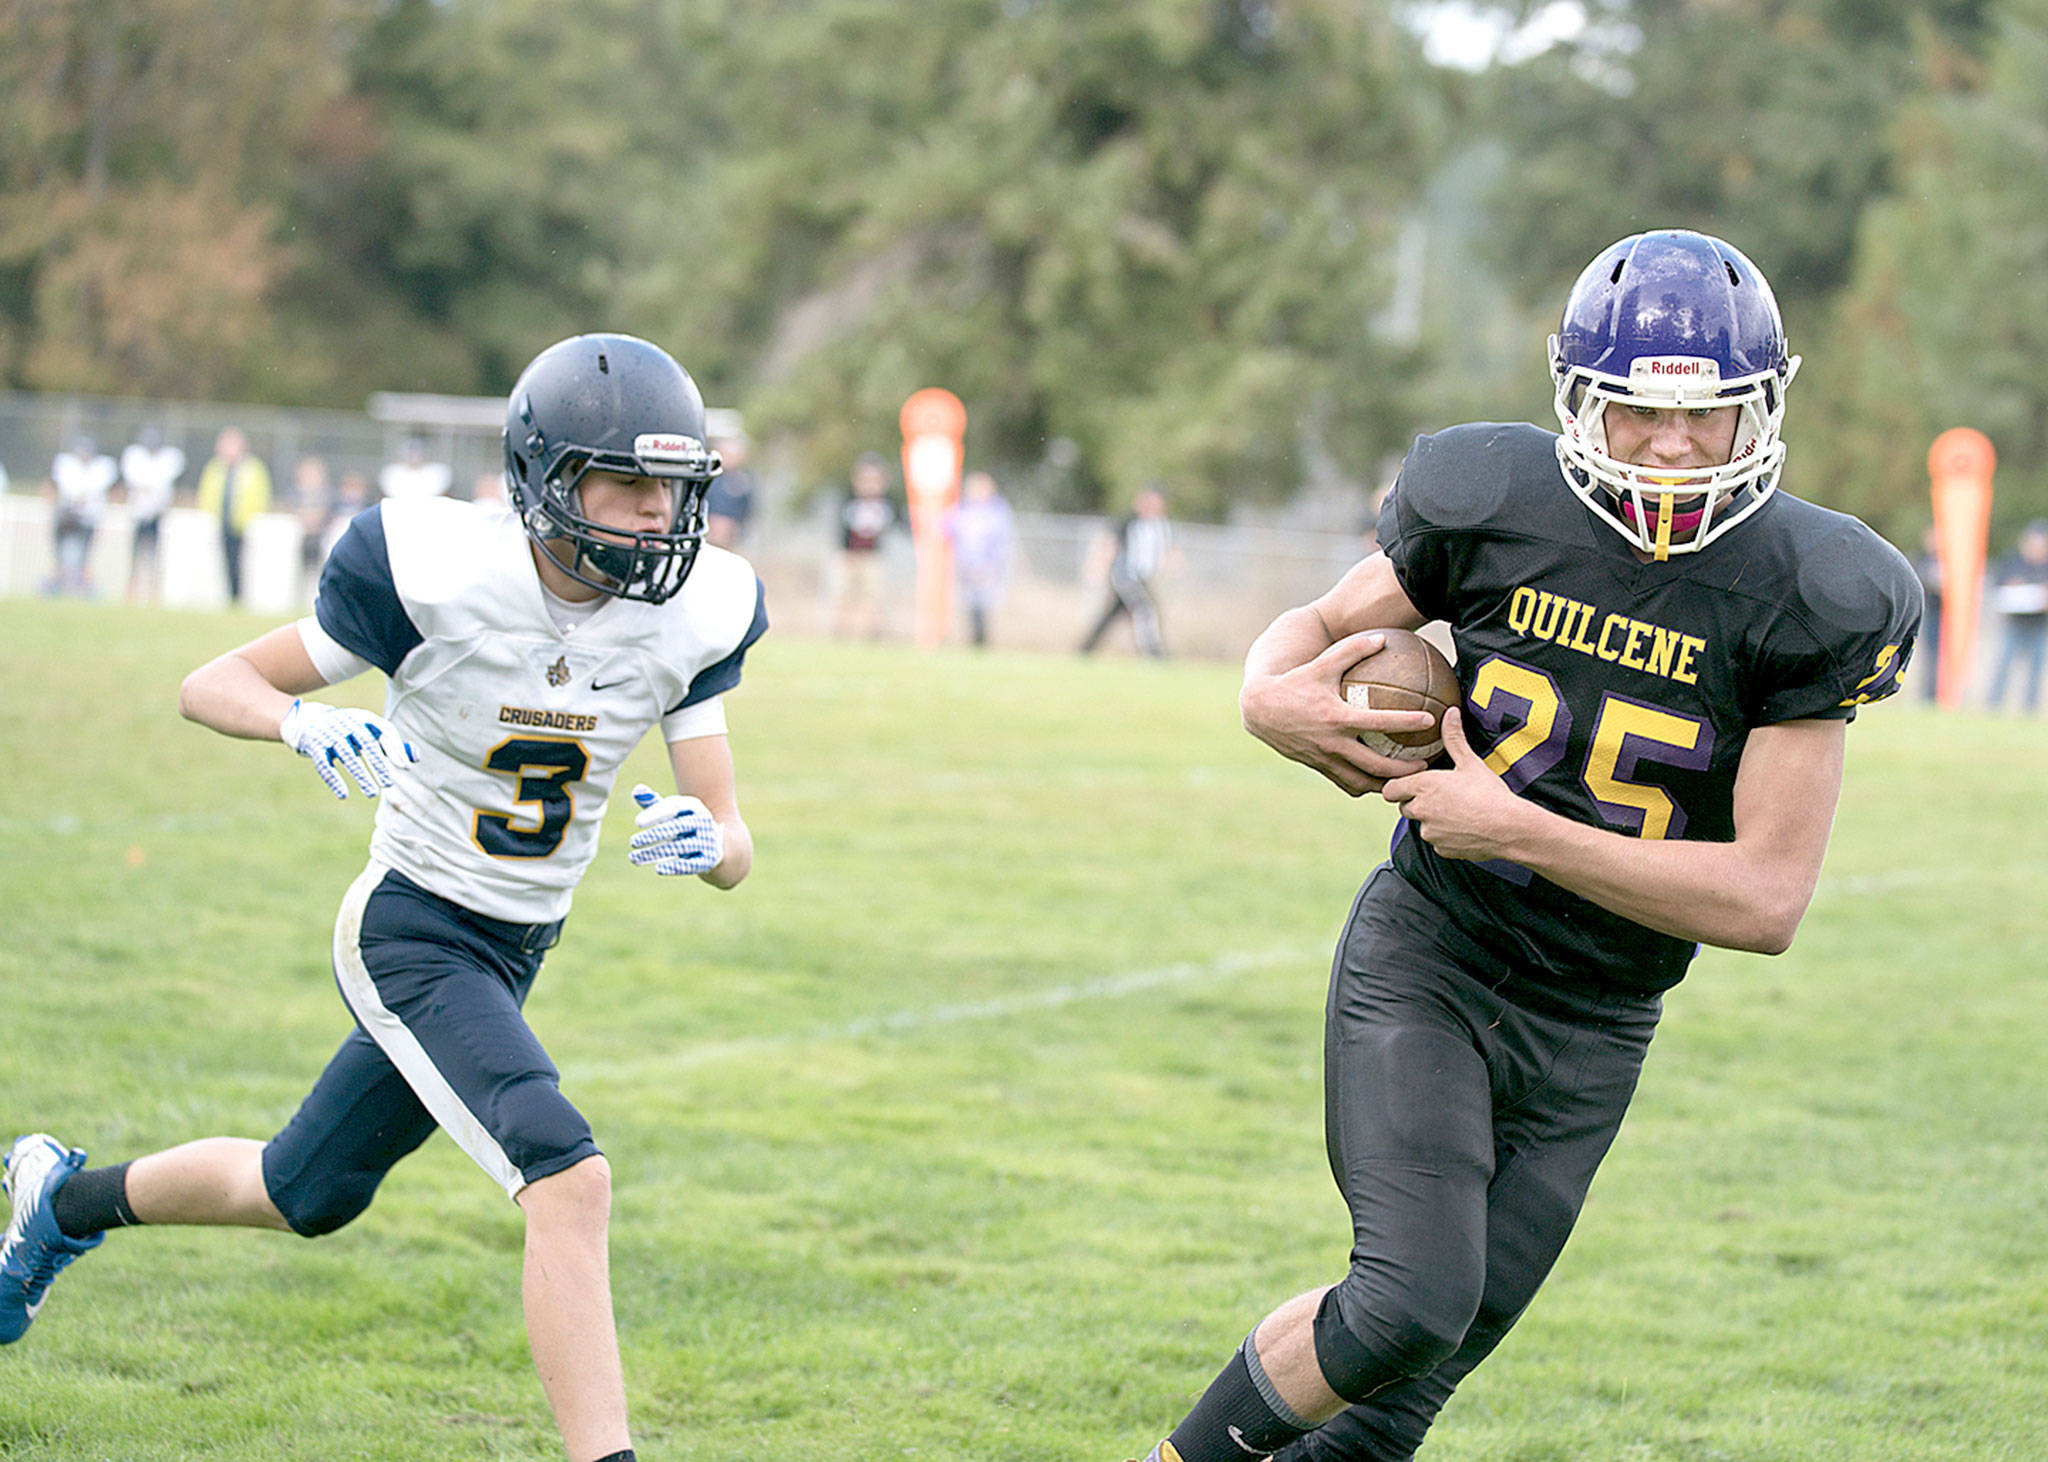 Quilcene’s Robert Comstock III outruns Tacoma Baptist’s Matthew Kessel, (3), taking a pass 47 yards for a touchdown in the Rangers’ 66-26 win Saturday over the Crusaders. (Steve Mullensky /For Peninsula Daily News)